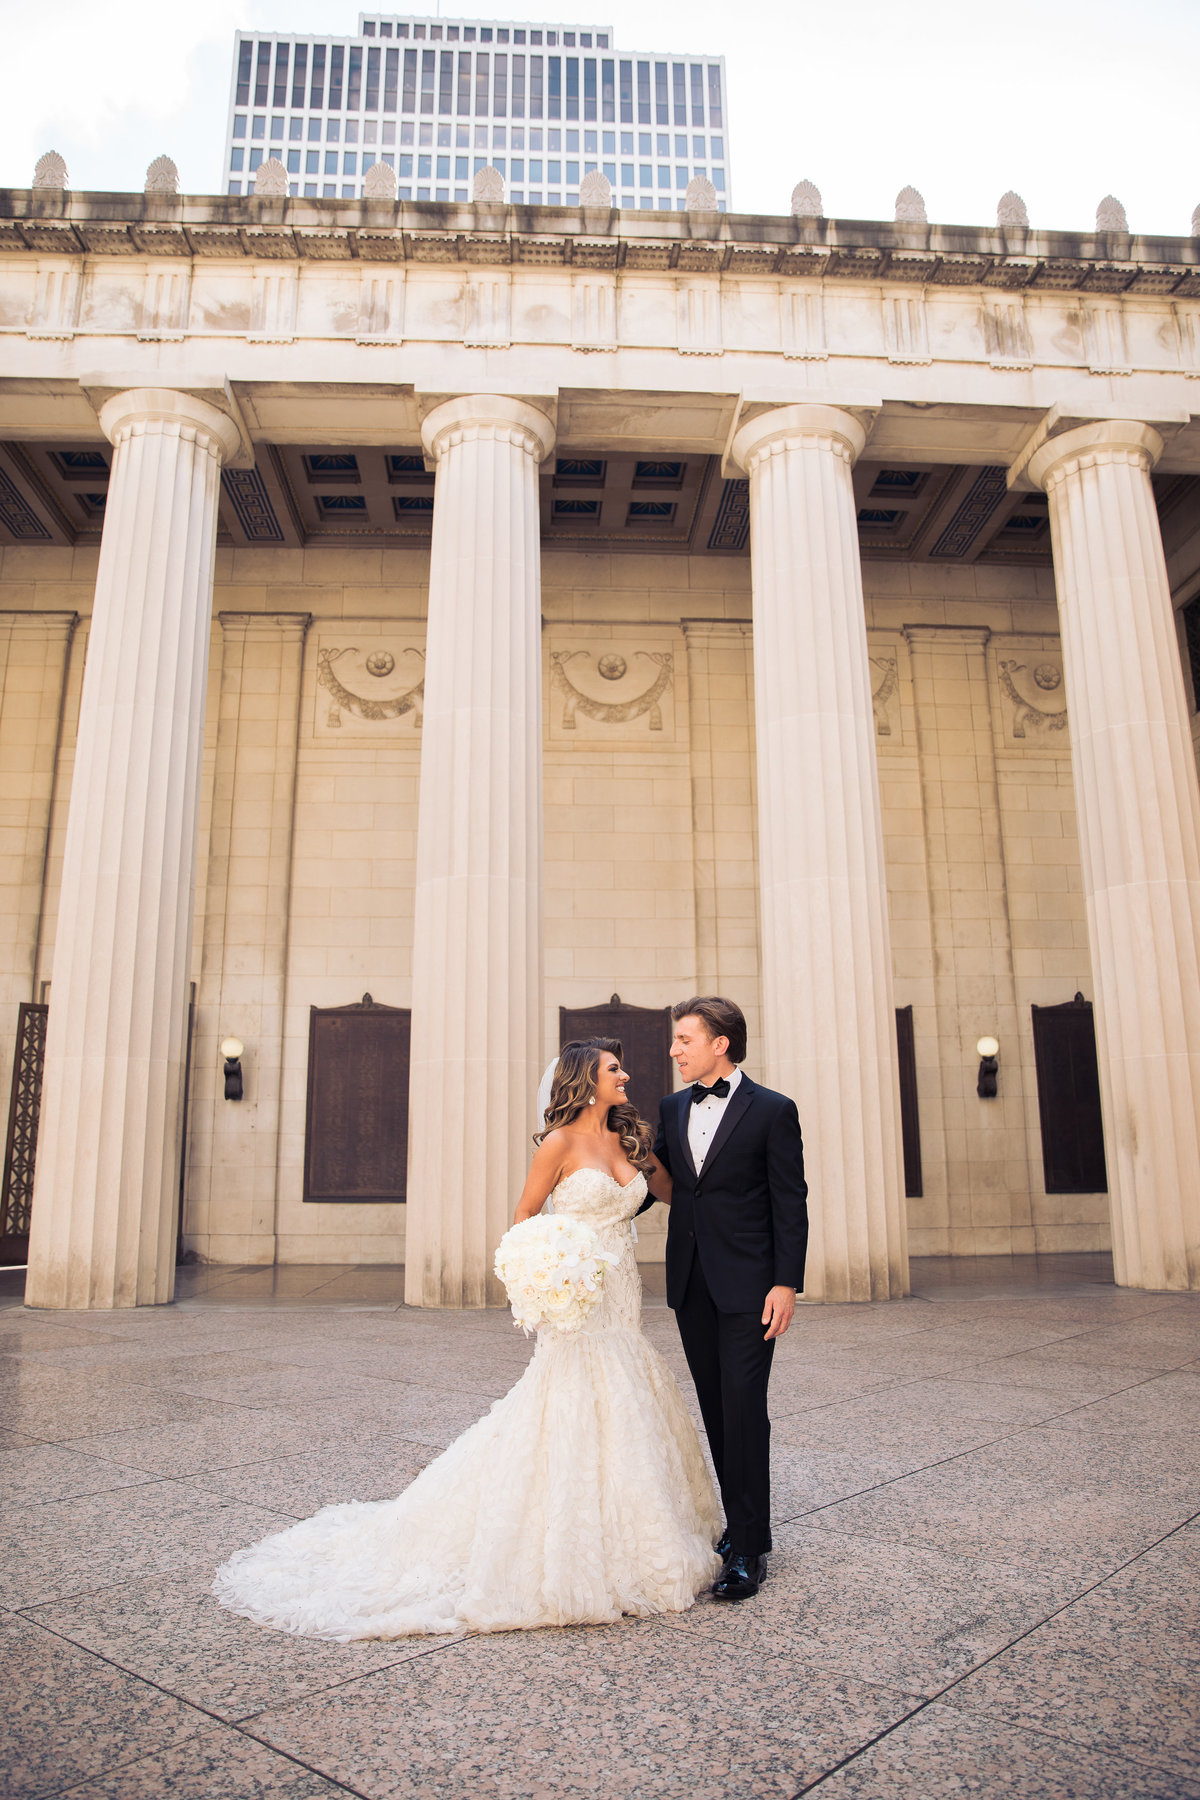 Bride and Groom in front of the columns at War Memorial.